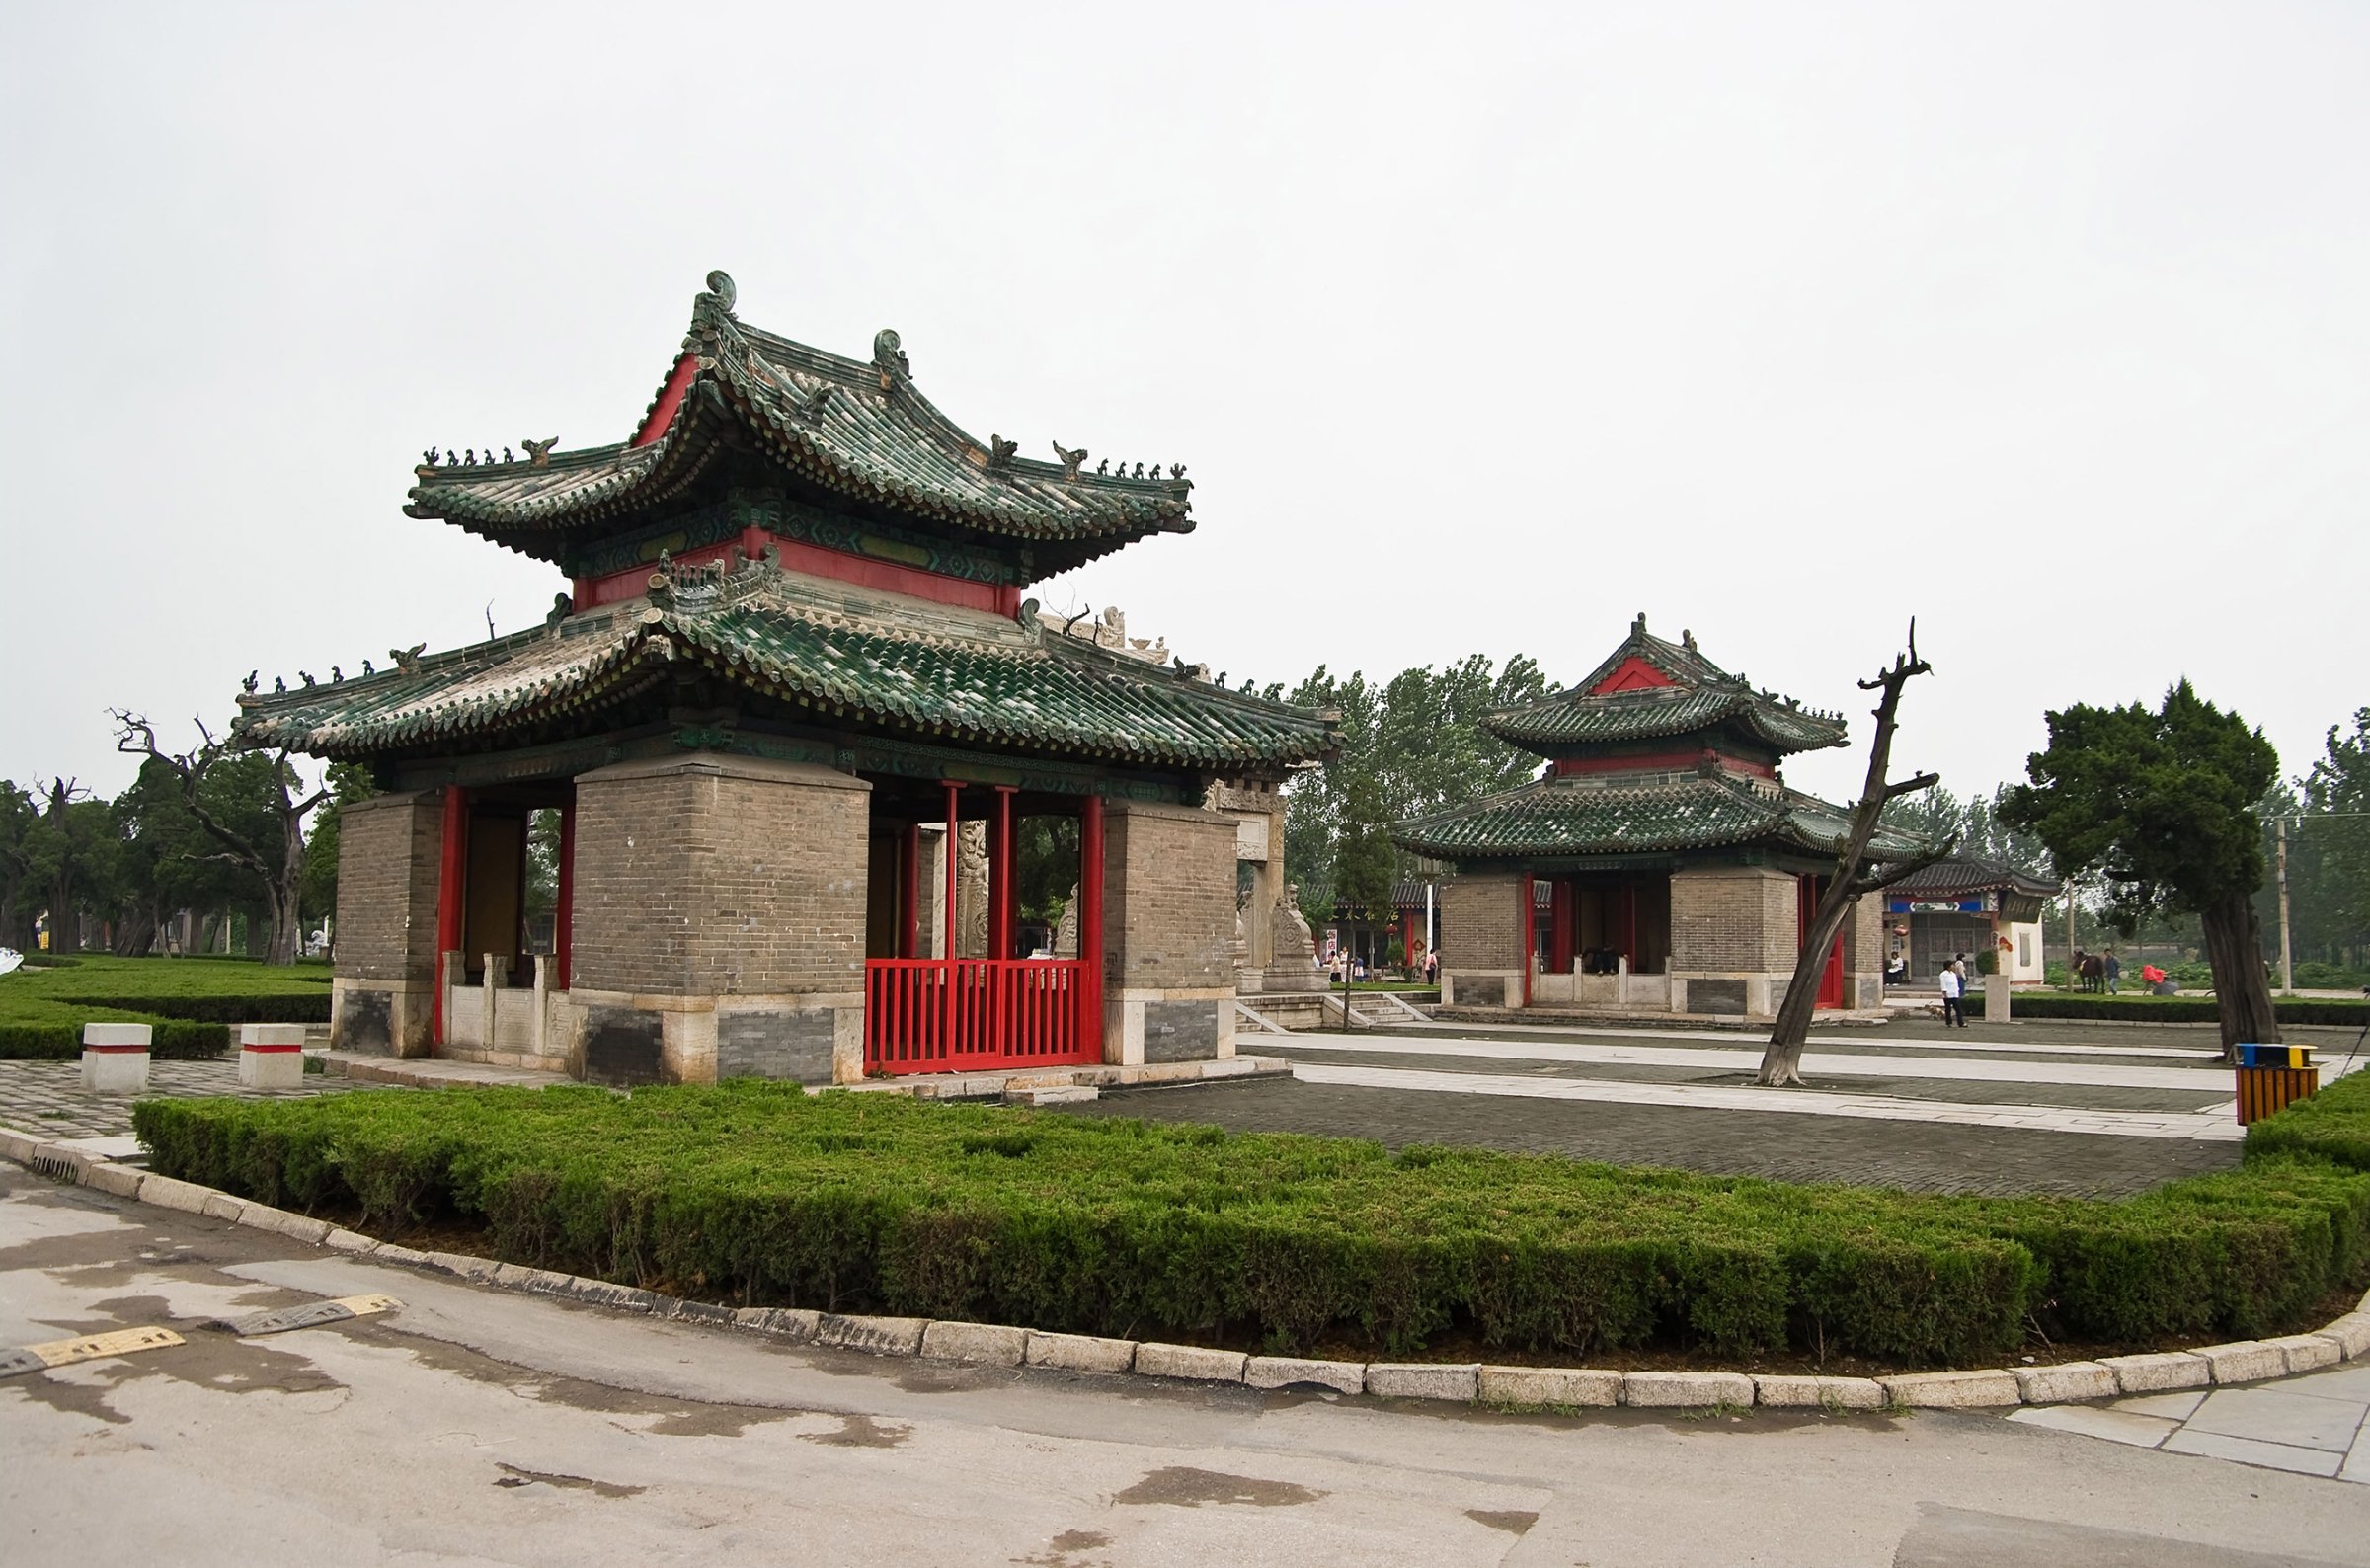 A view of memorial buildings at the Cemetery of Confucius, or Kong Lin, in Qufu city, Shandong province, China, May 22, 2014.